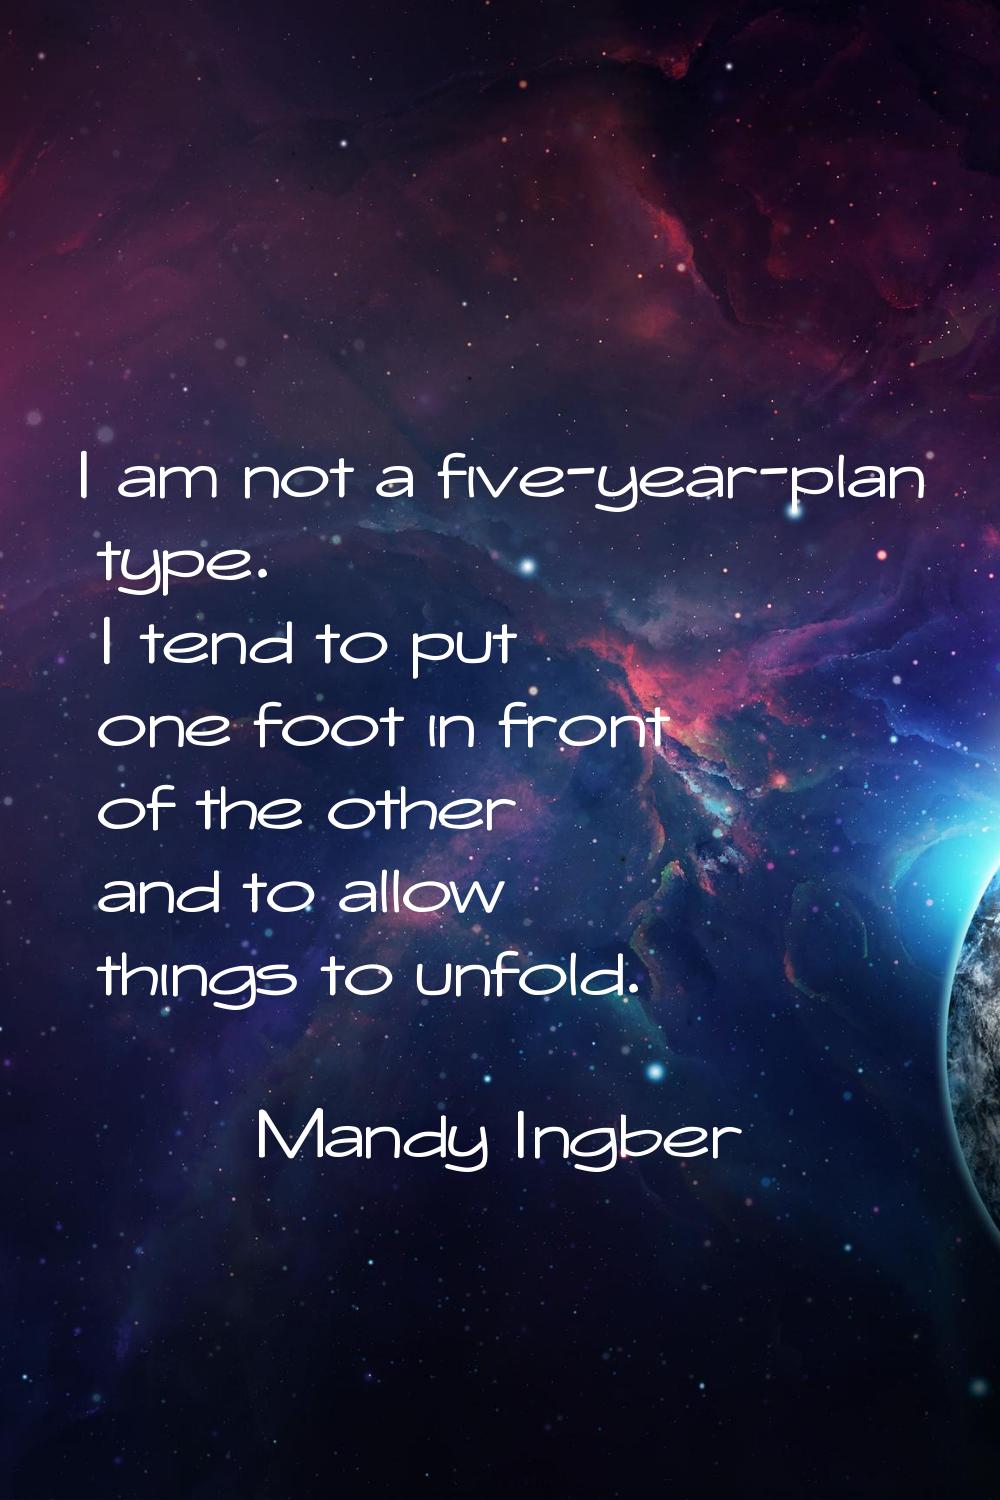 I am not a five-year-plan type. I tend to put one foot in front of the other and to allow things to